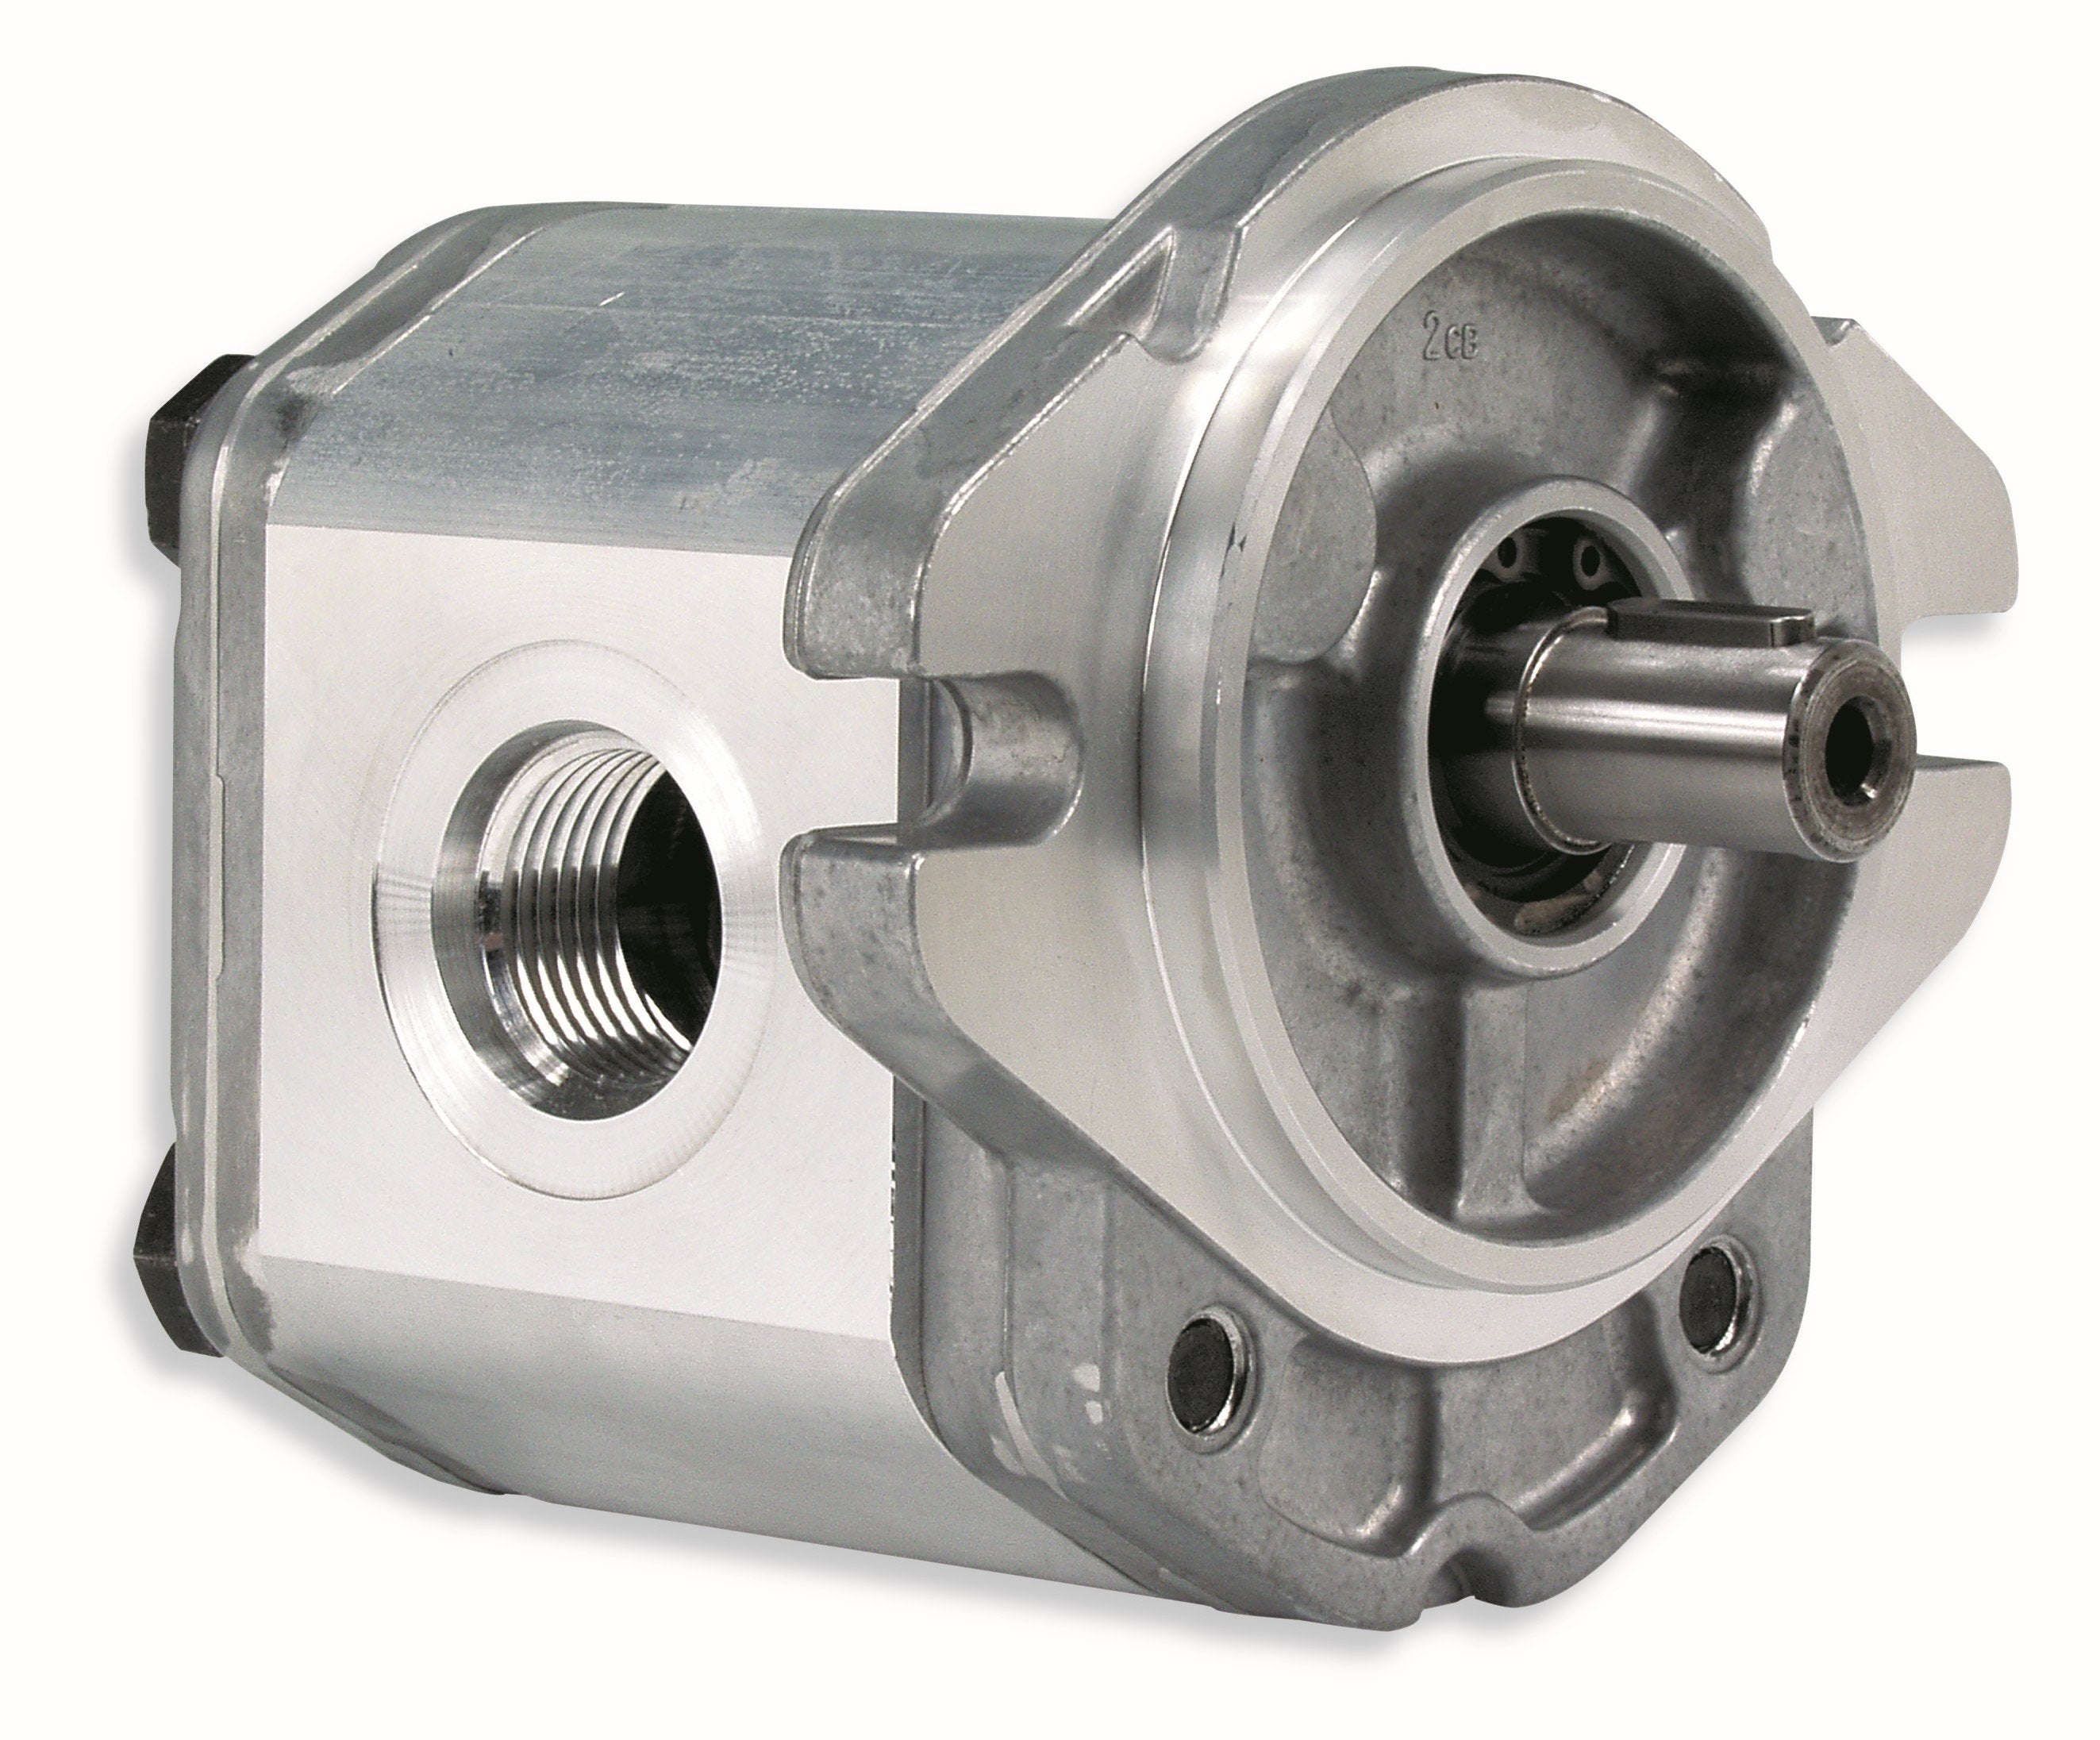 GHM3A-R-40-S1-E4 : Marzocchi Gear Motor, Bidirectional, 26cc, 4060psi rated, 3300RPM, 1" Code 61 ports, 13T 16/32DP Splined Shaft